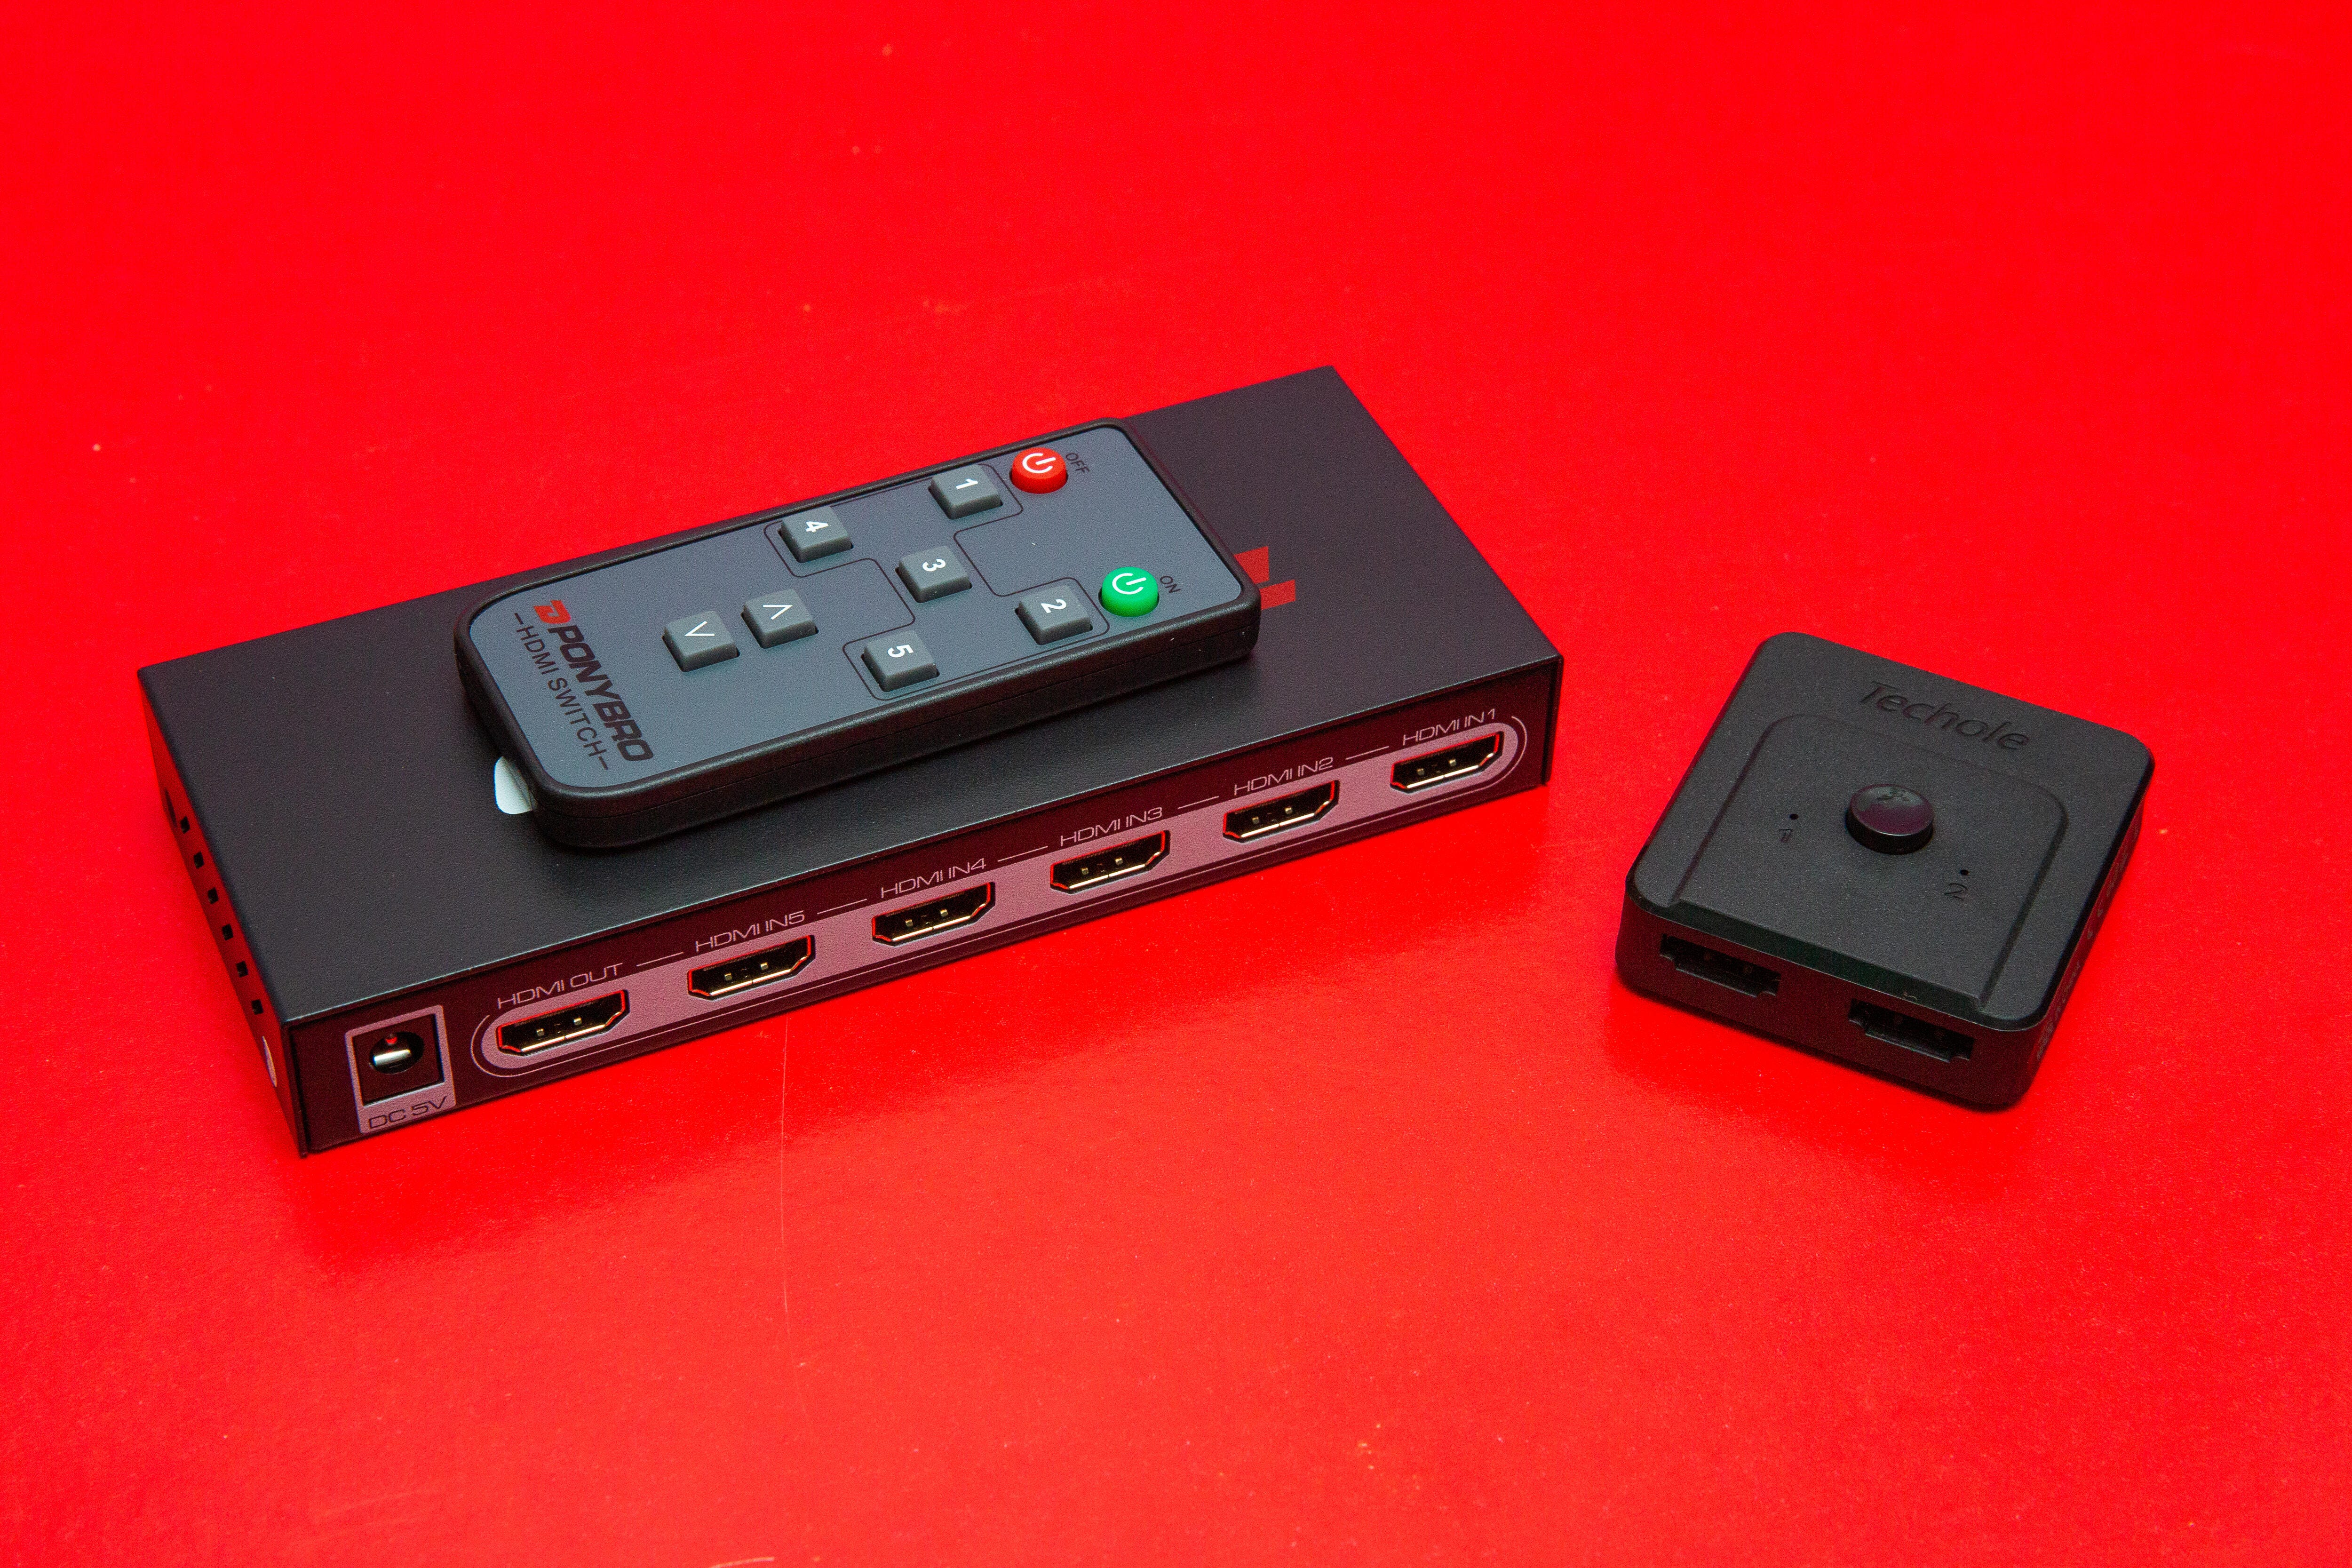 HDMI splitter vs. HDMI switch: They actually serve opposite purposes